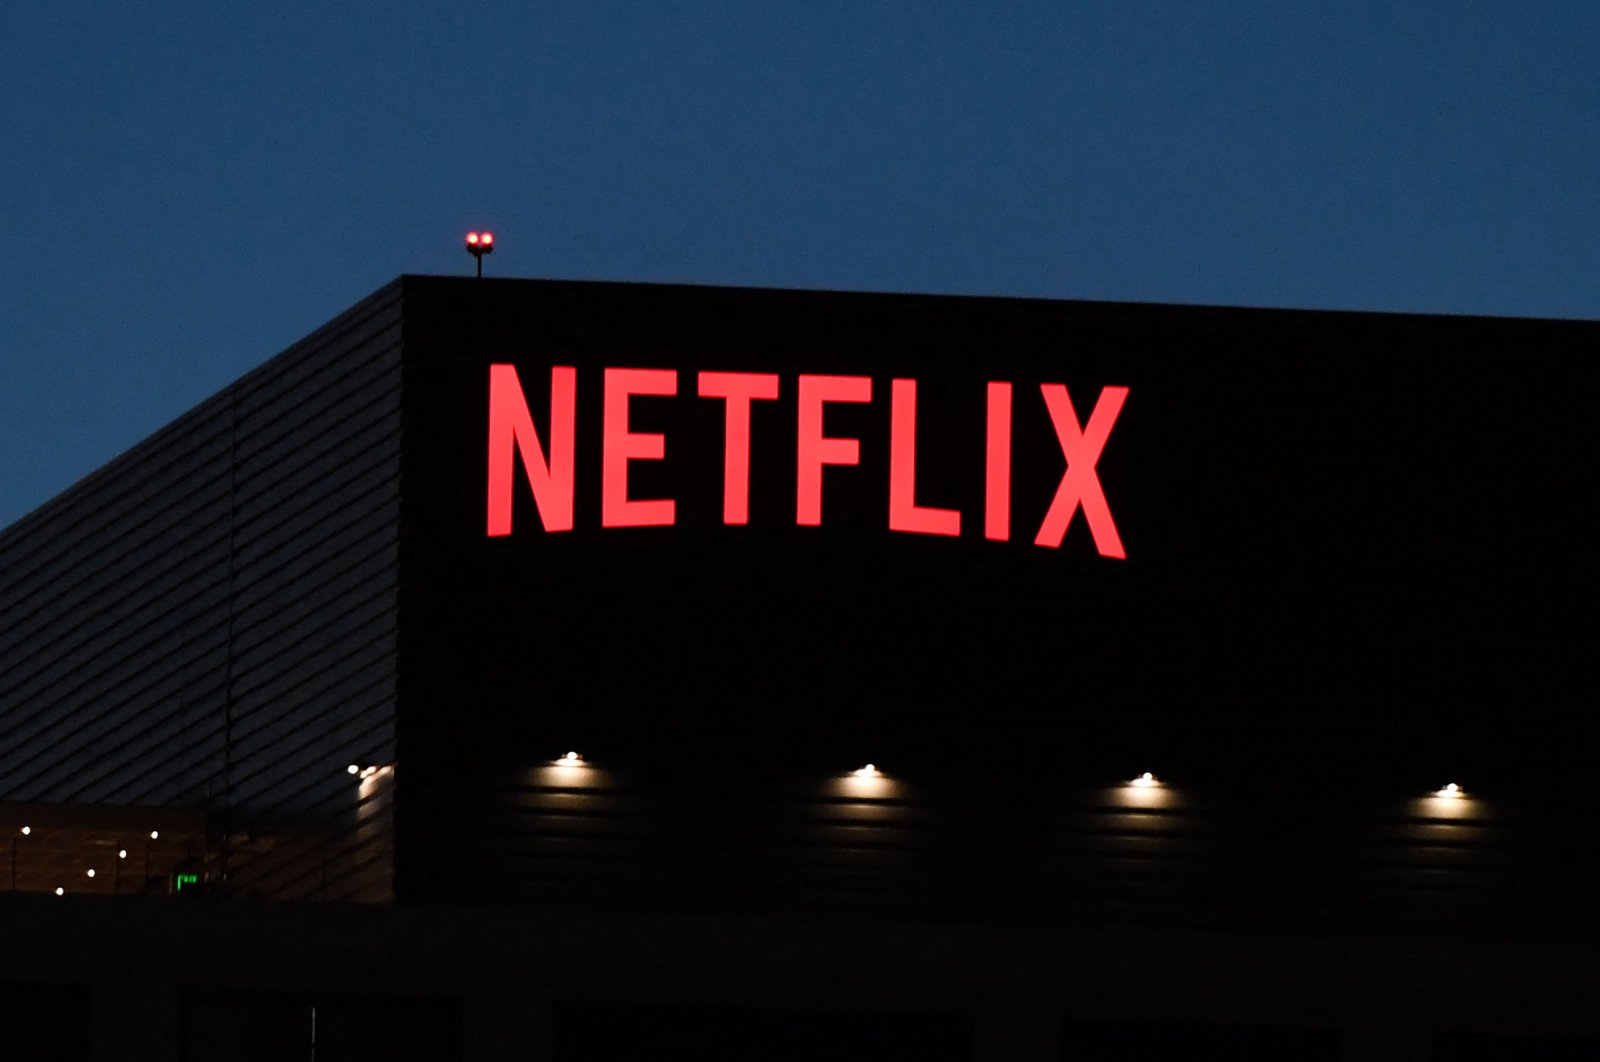 In this file photo taken on Oct. 19, 2021, the Netflix logo is seen on the Netflix, Inc. building on Sunset Boulevard in Los Angeles, California. (AFP Photo)